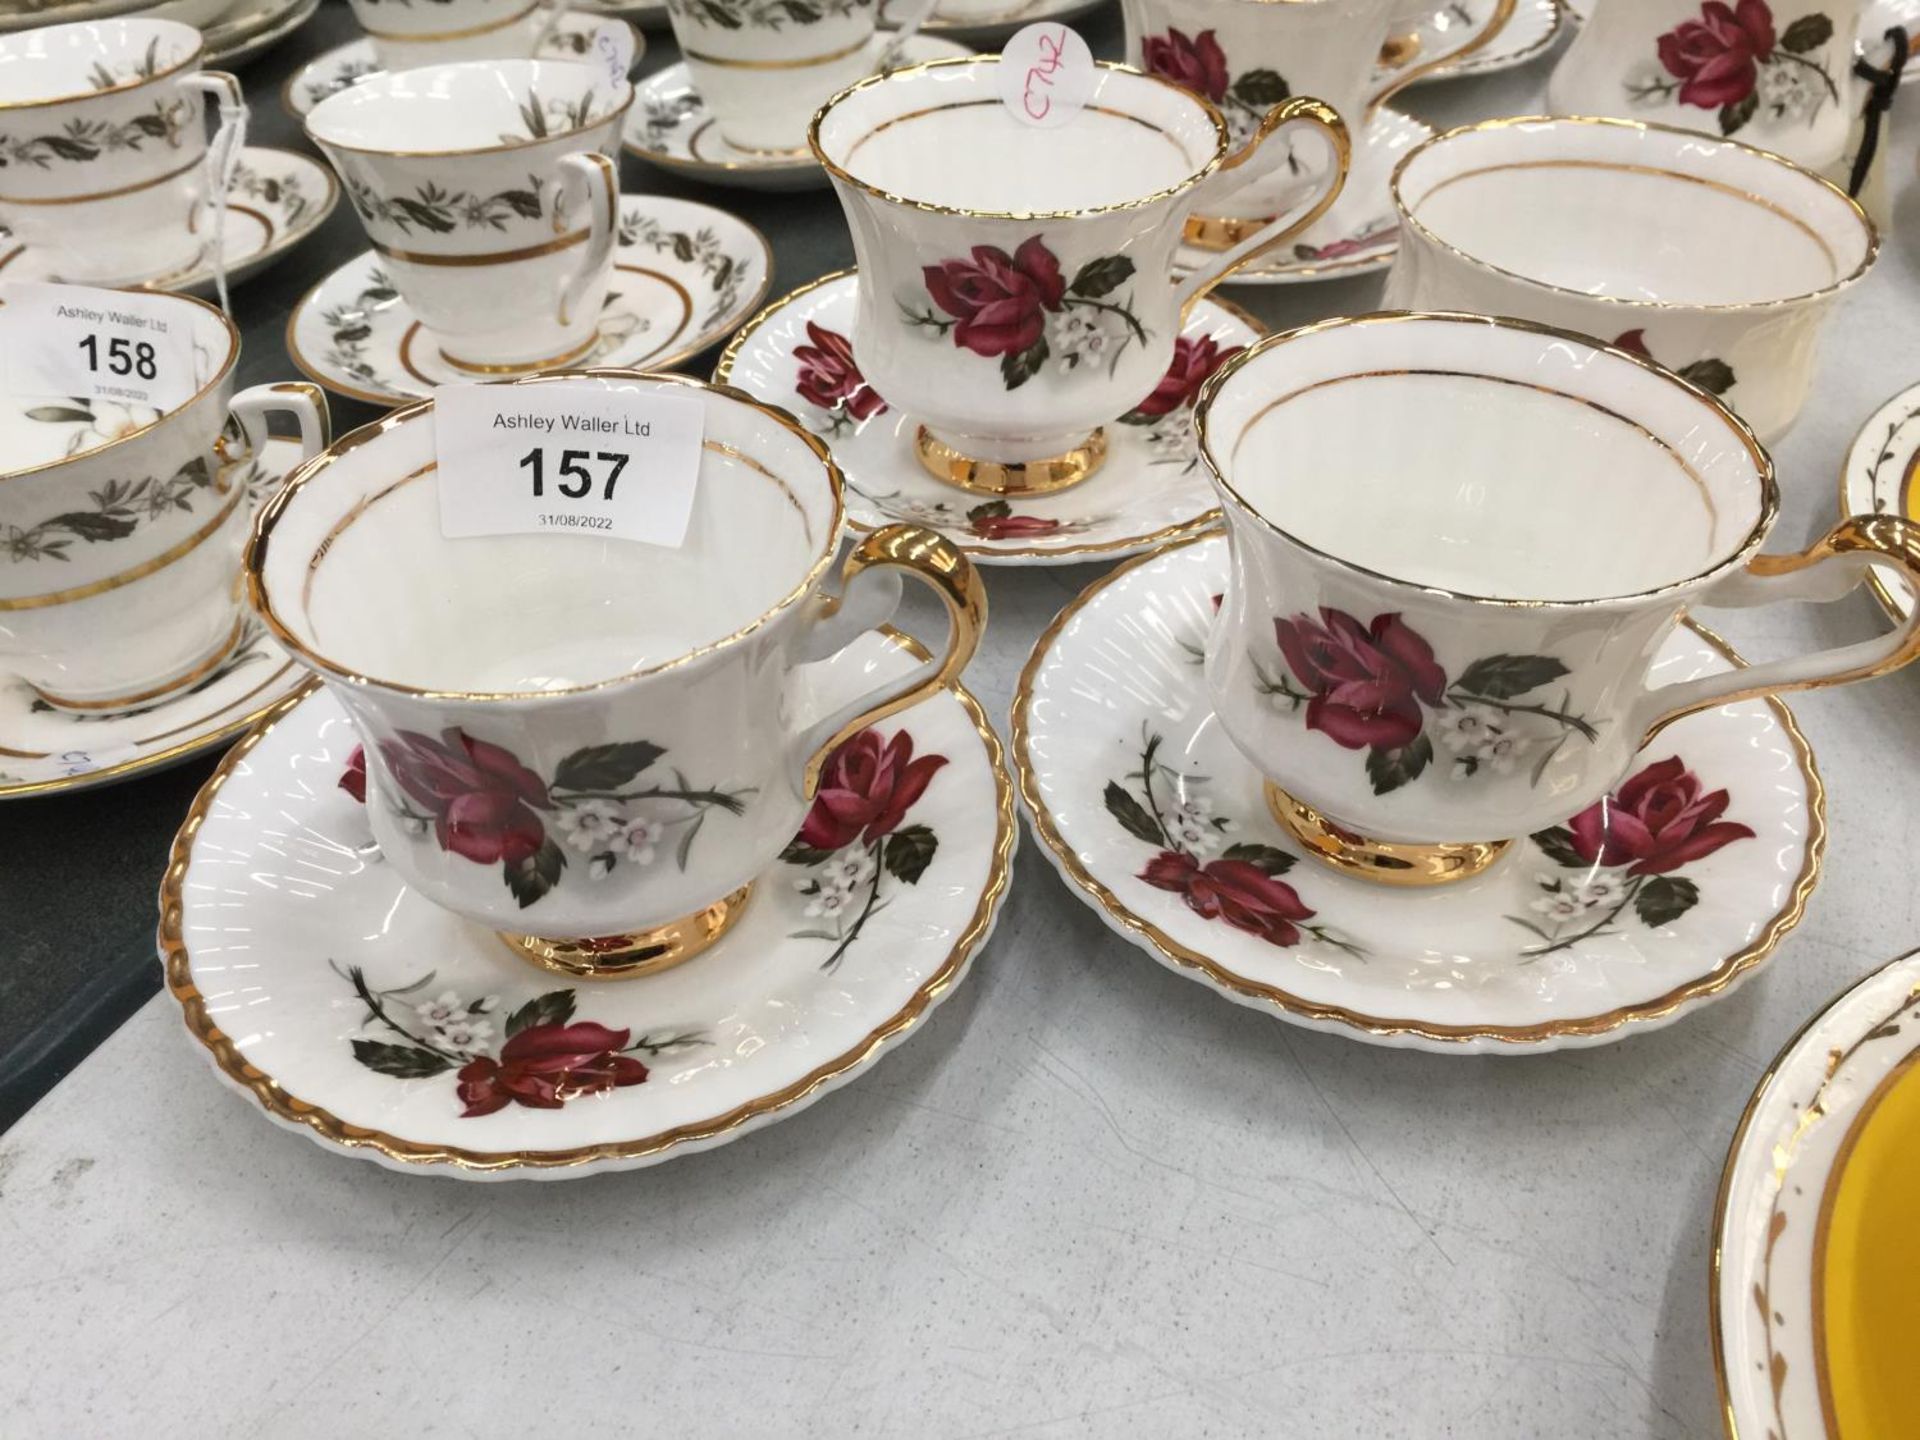 A VINTAGE ROSE PATTERNED 'LUBORN' TEASET TO INCLUDE CUPS, SAUCERS, CREAM JUG AND SUGAR BOWL - Image 2 of 6